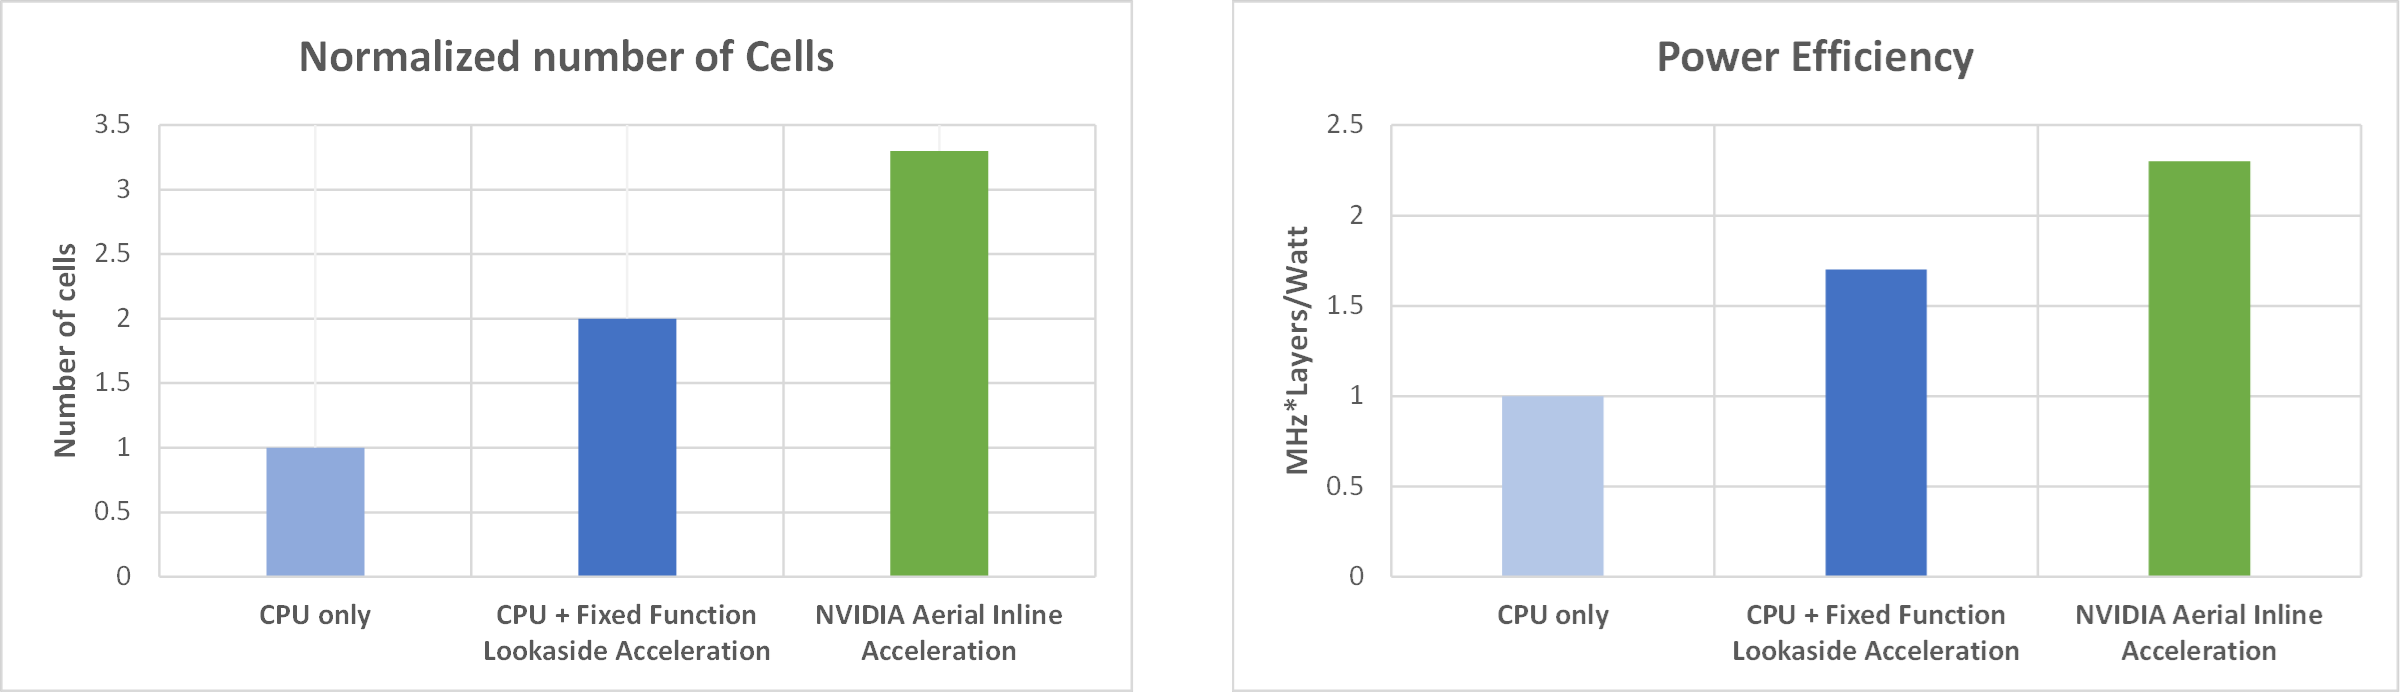 Bar charts show normalized cells and power efficiency for CPU only, CPU plus fixed-function lookaside acceleration, and NVIDIA Aerial inline acceleration.